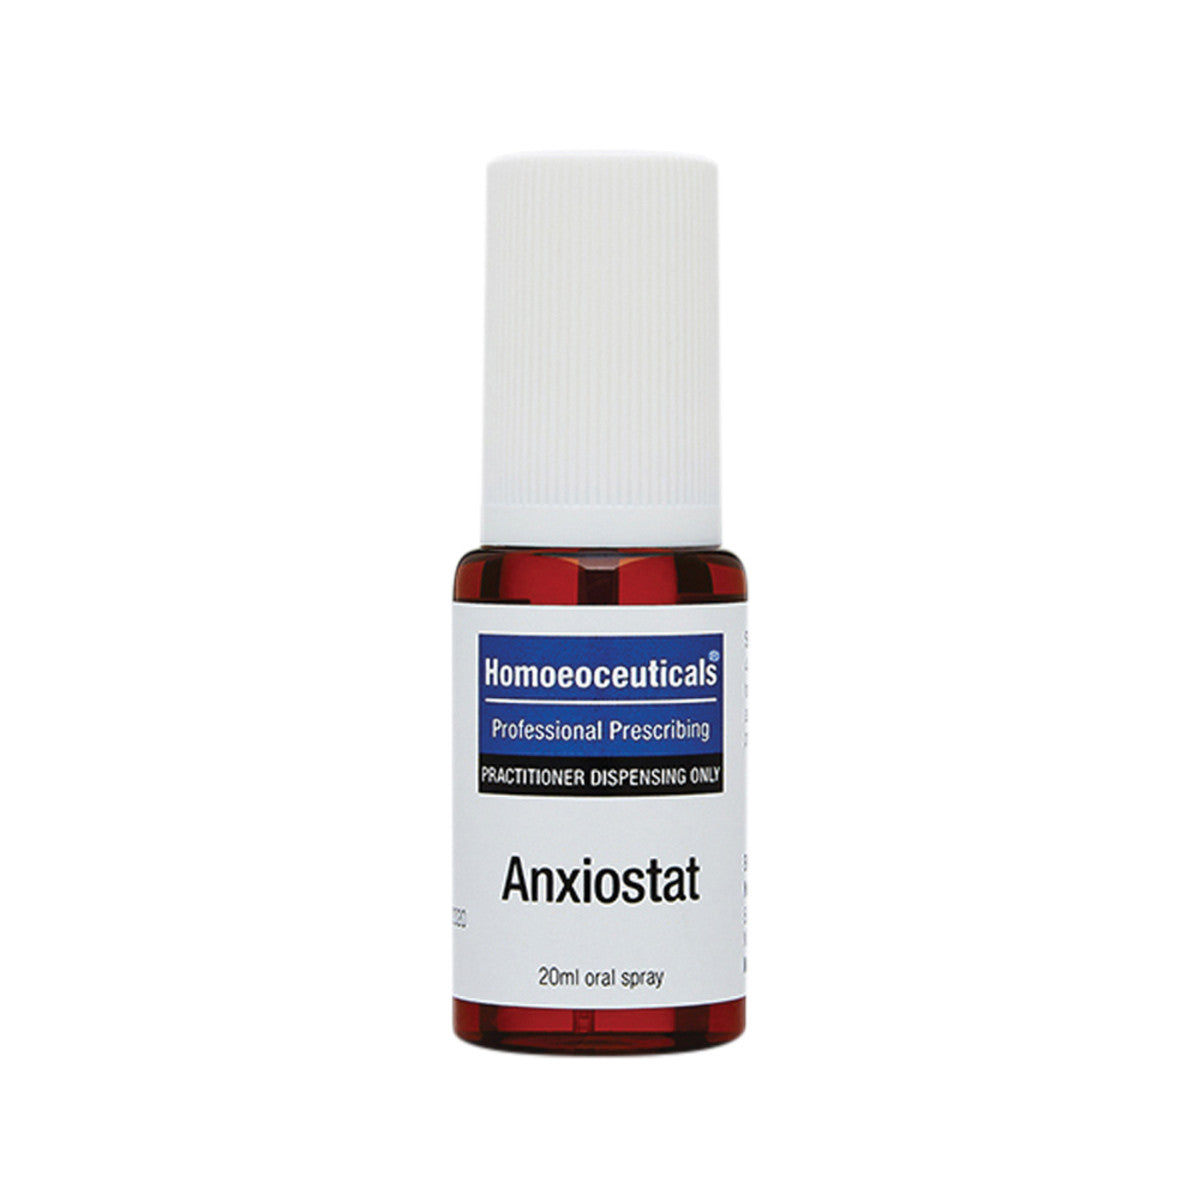 Homoeoceuticals - Anxiostat Spray